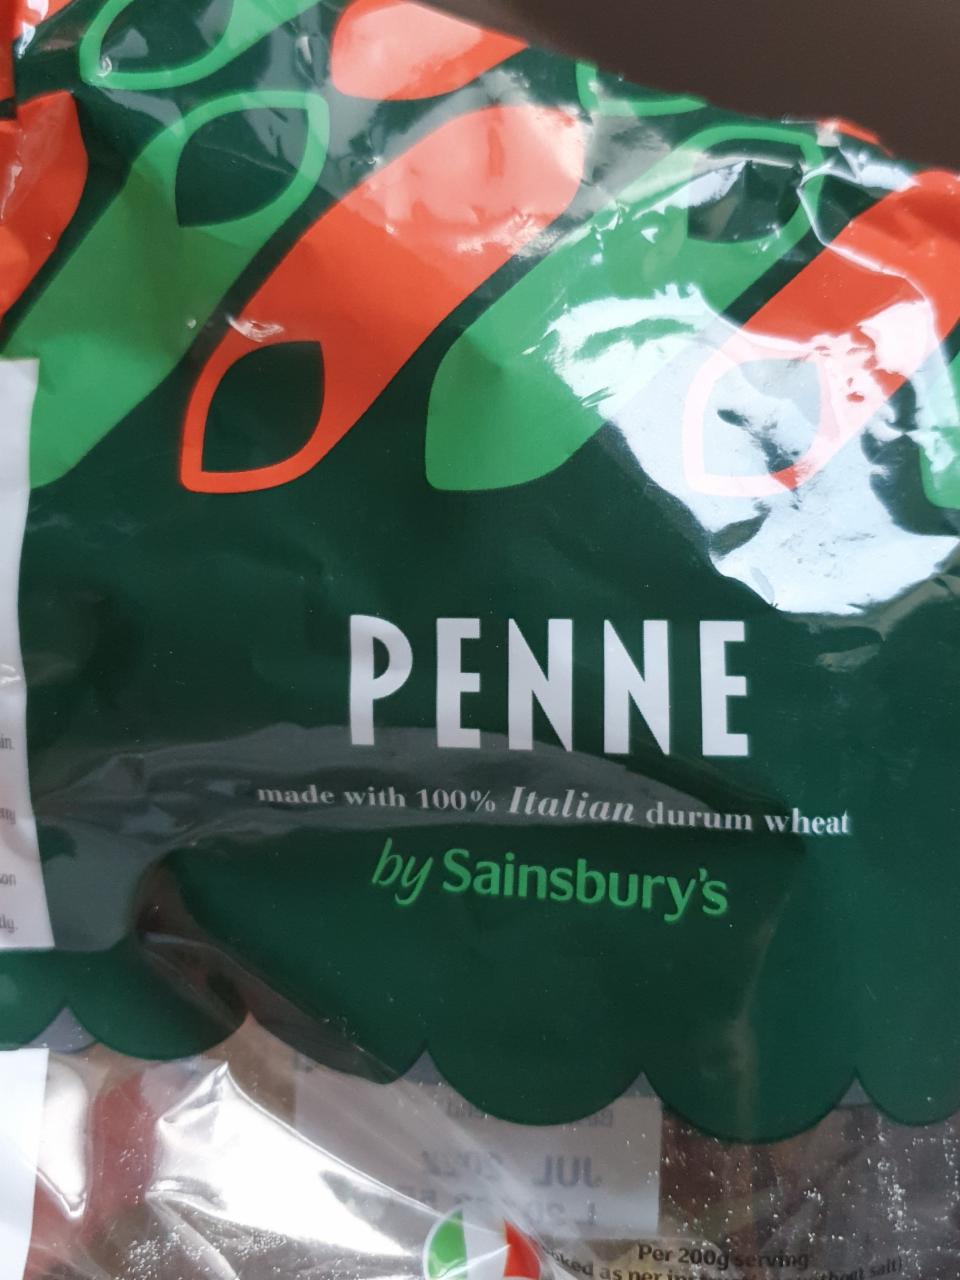 Fotografie - Penne made with 100% Italian durum wheat by Sainsbury's